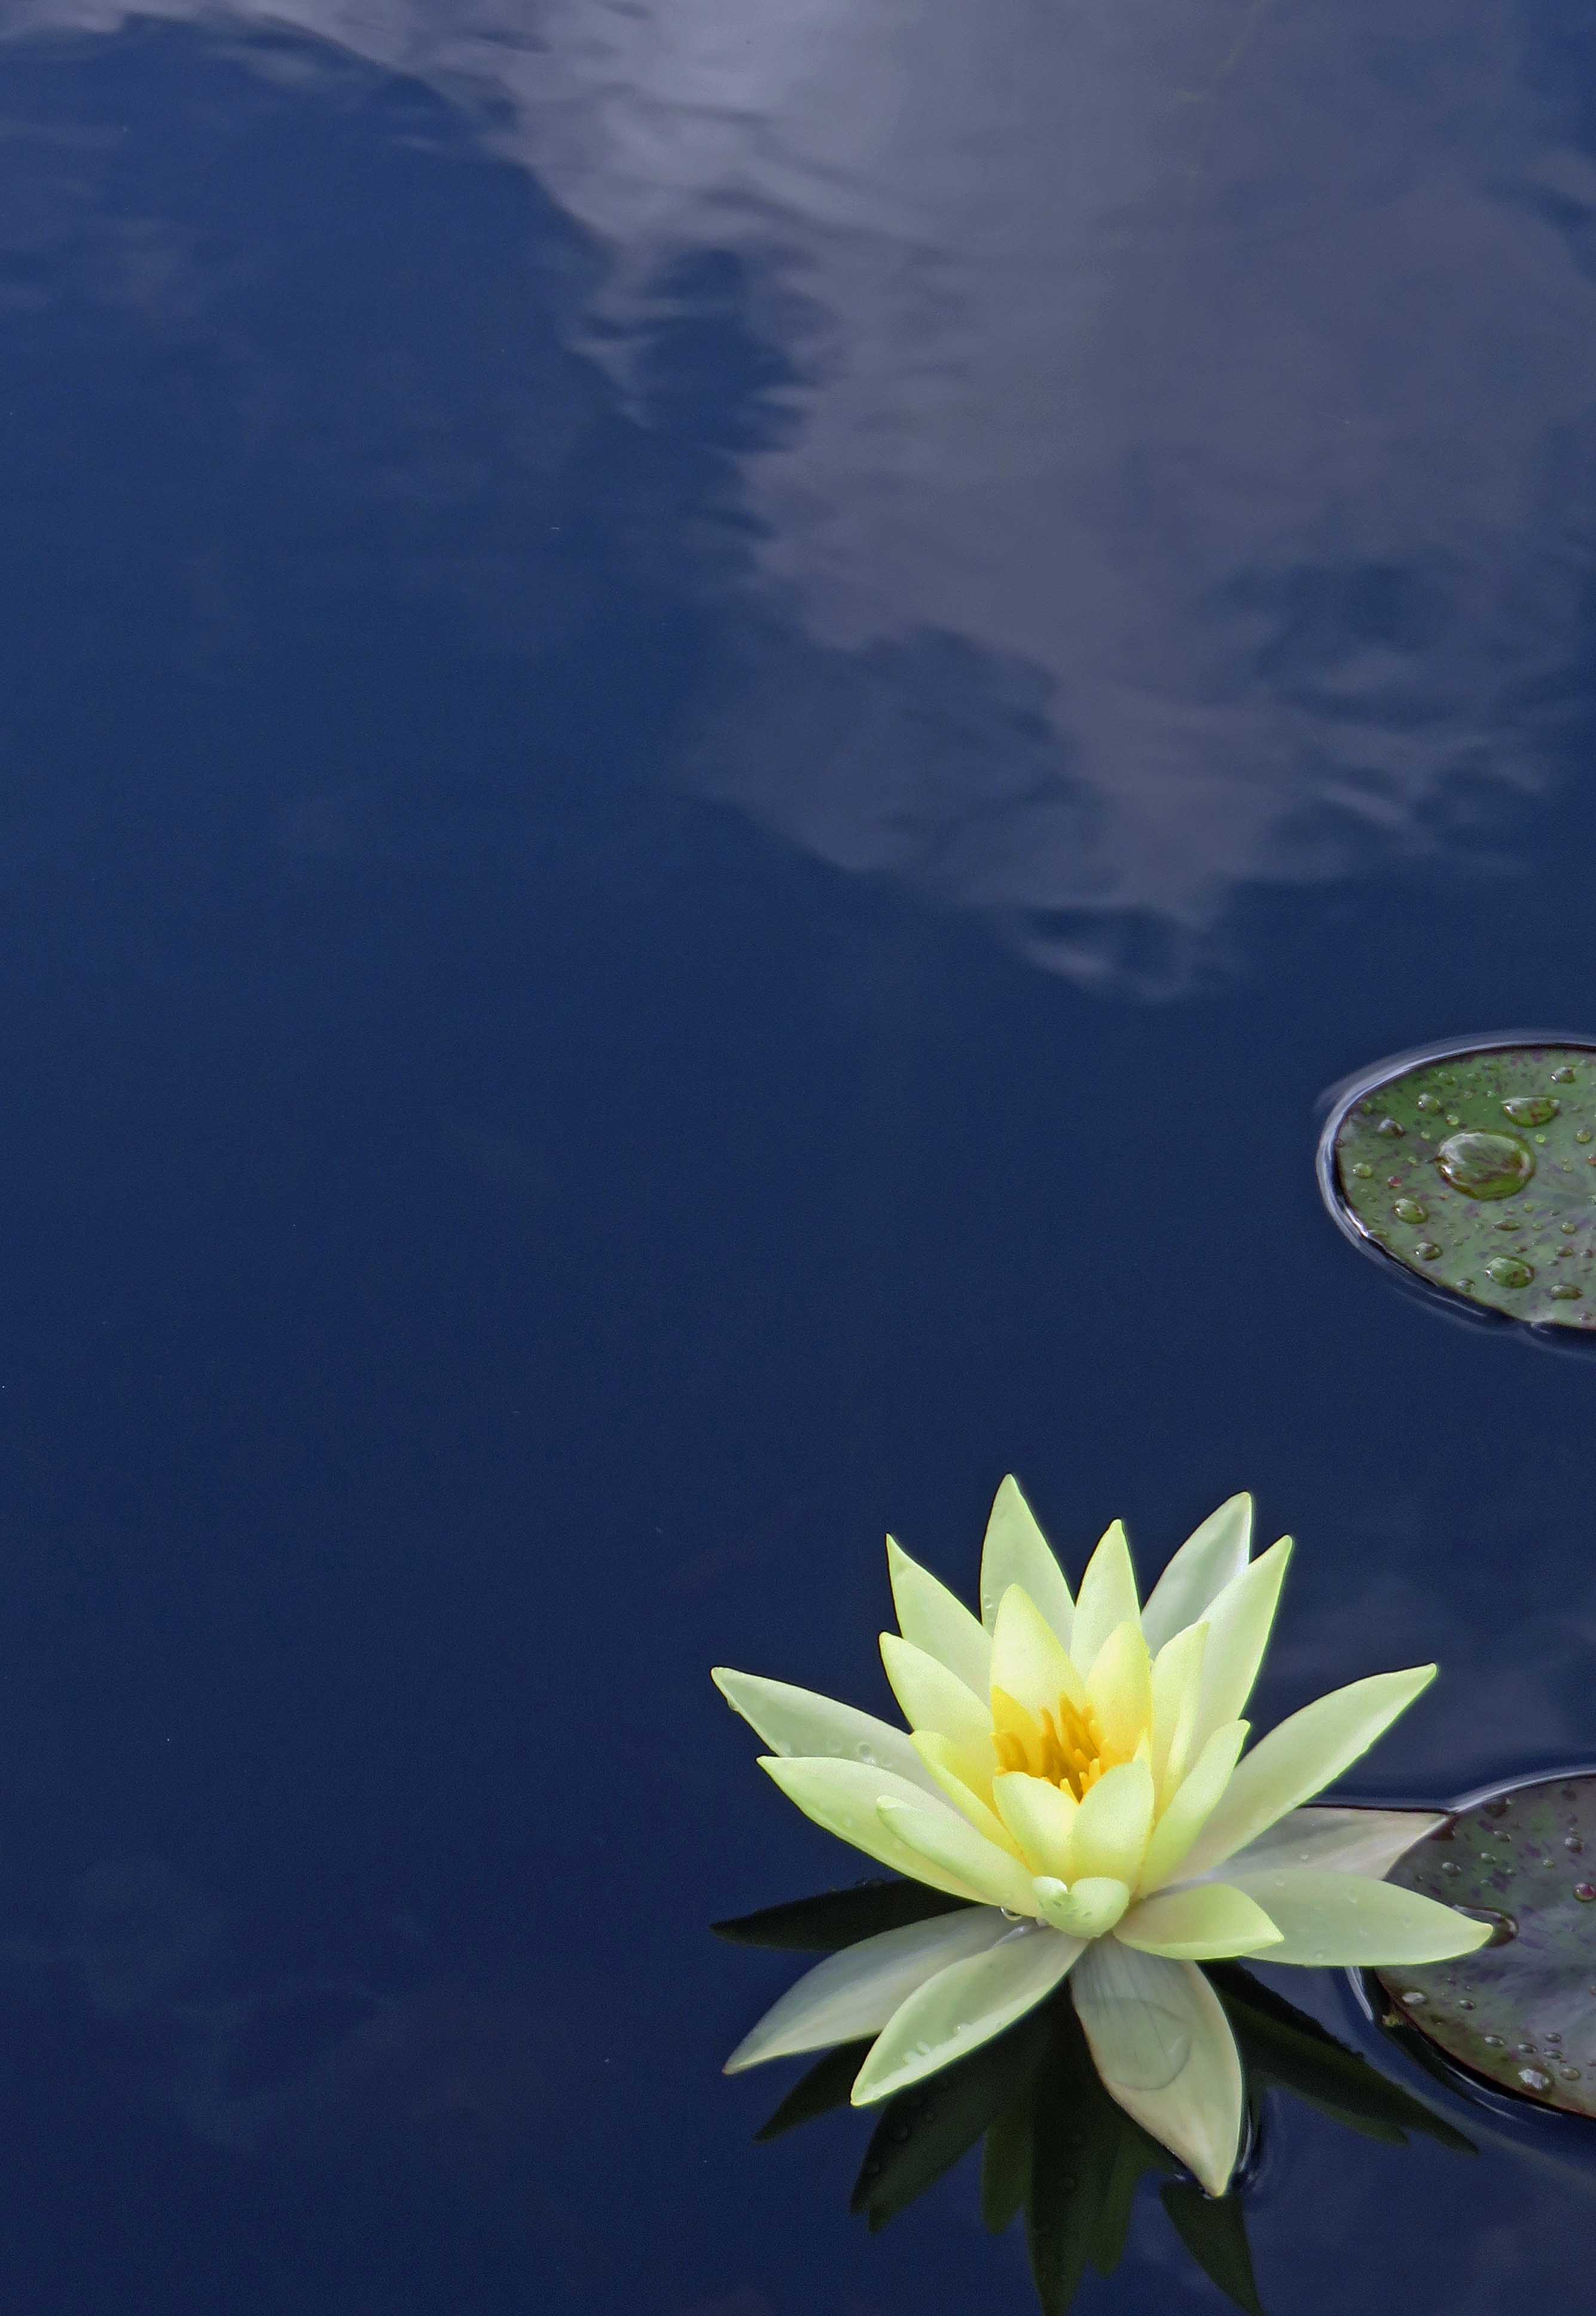 Water lily Paintings and Photos | Tracts4free